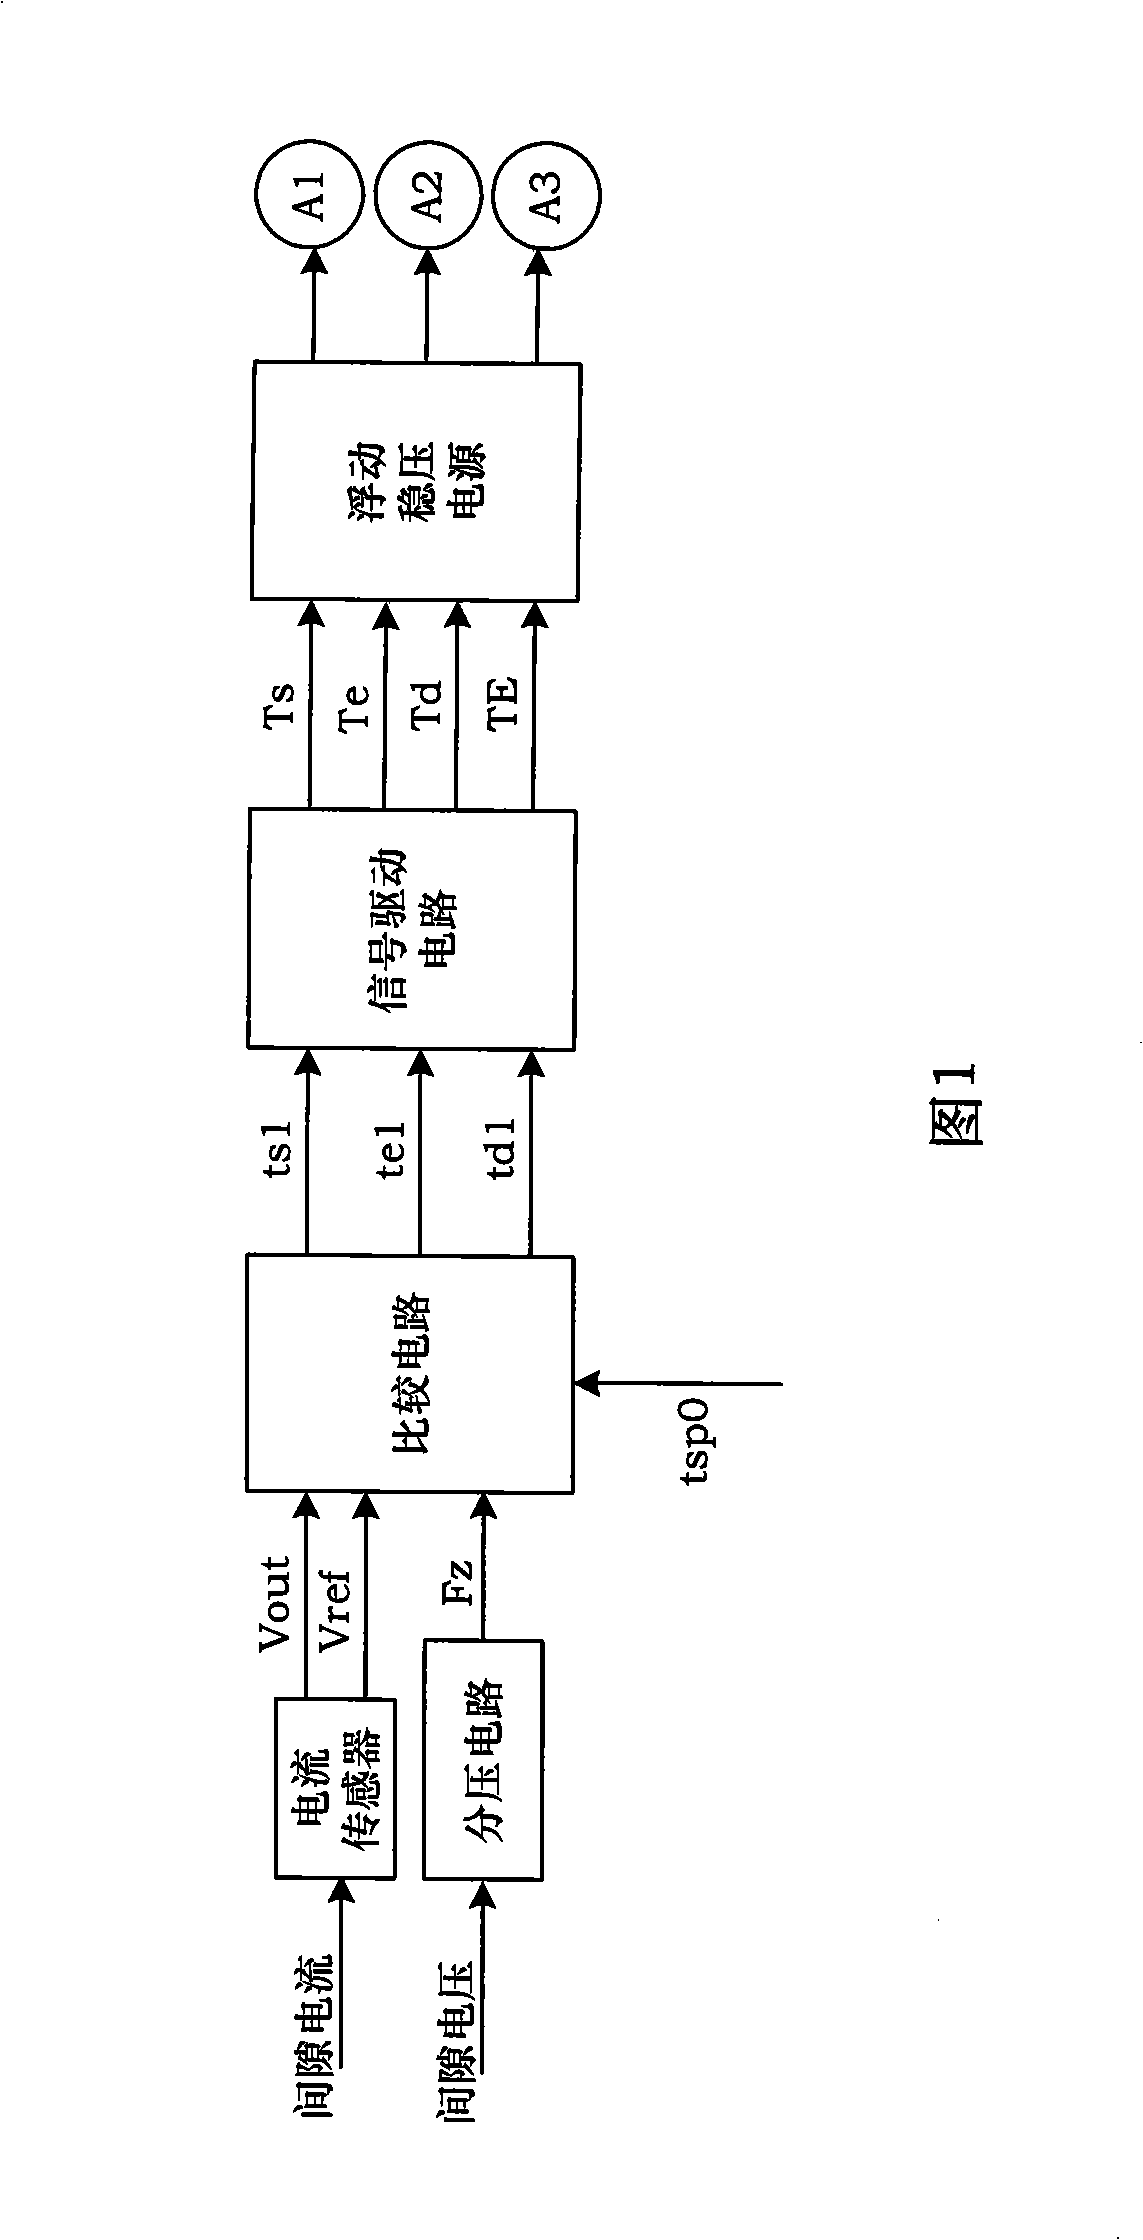 Electrospark wire-electrode cutting process discharge condition detecting device